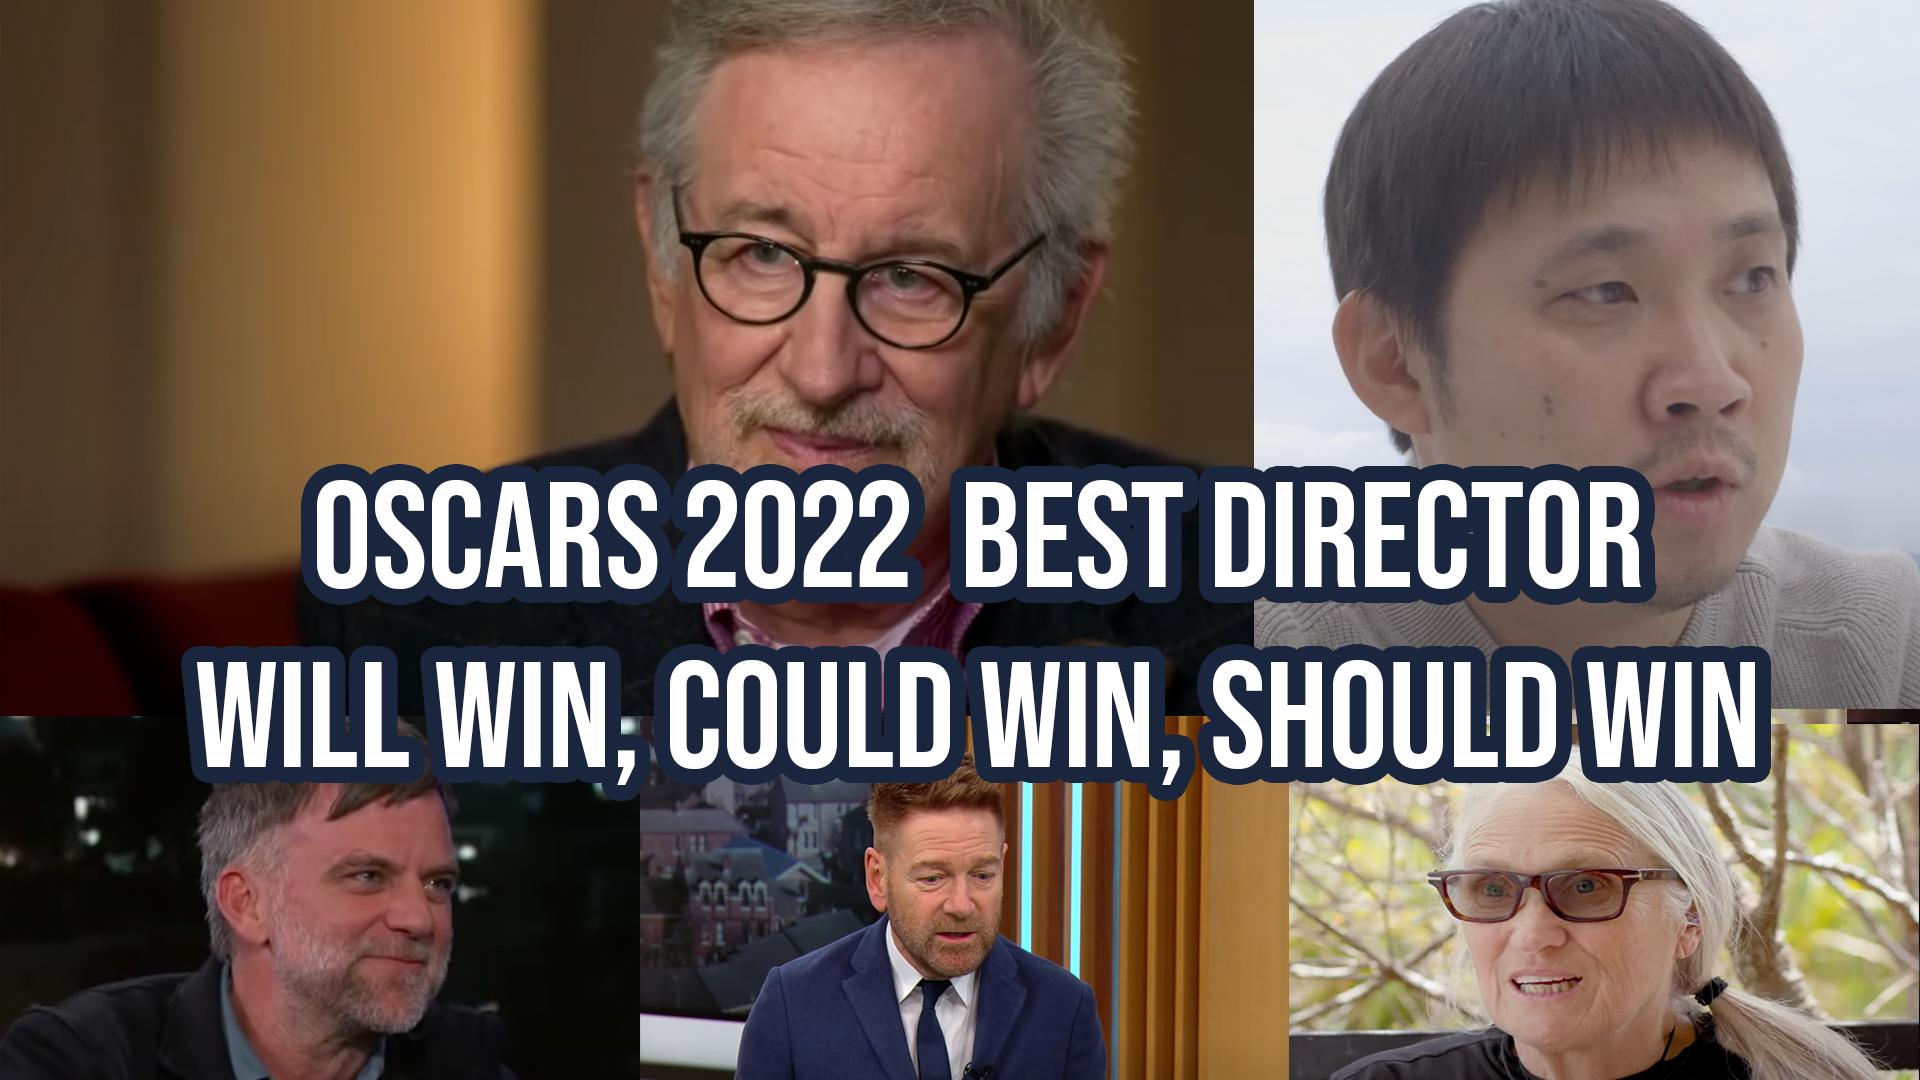 Oscars 2022 Best Director: Will Win, Could Win, Should Win